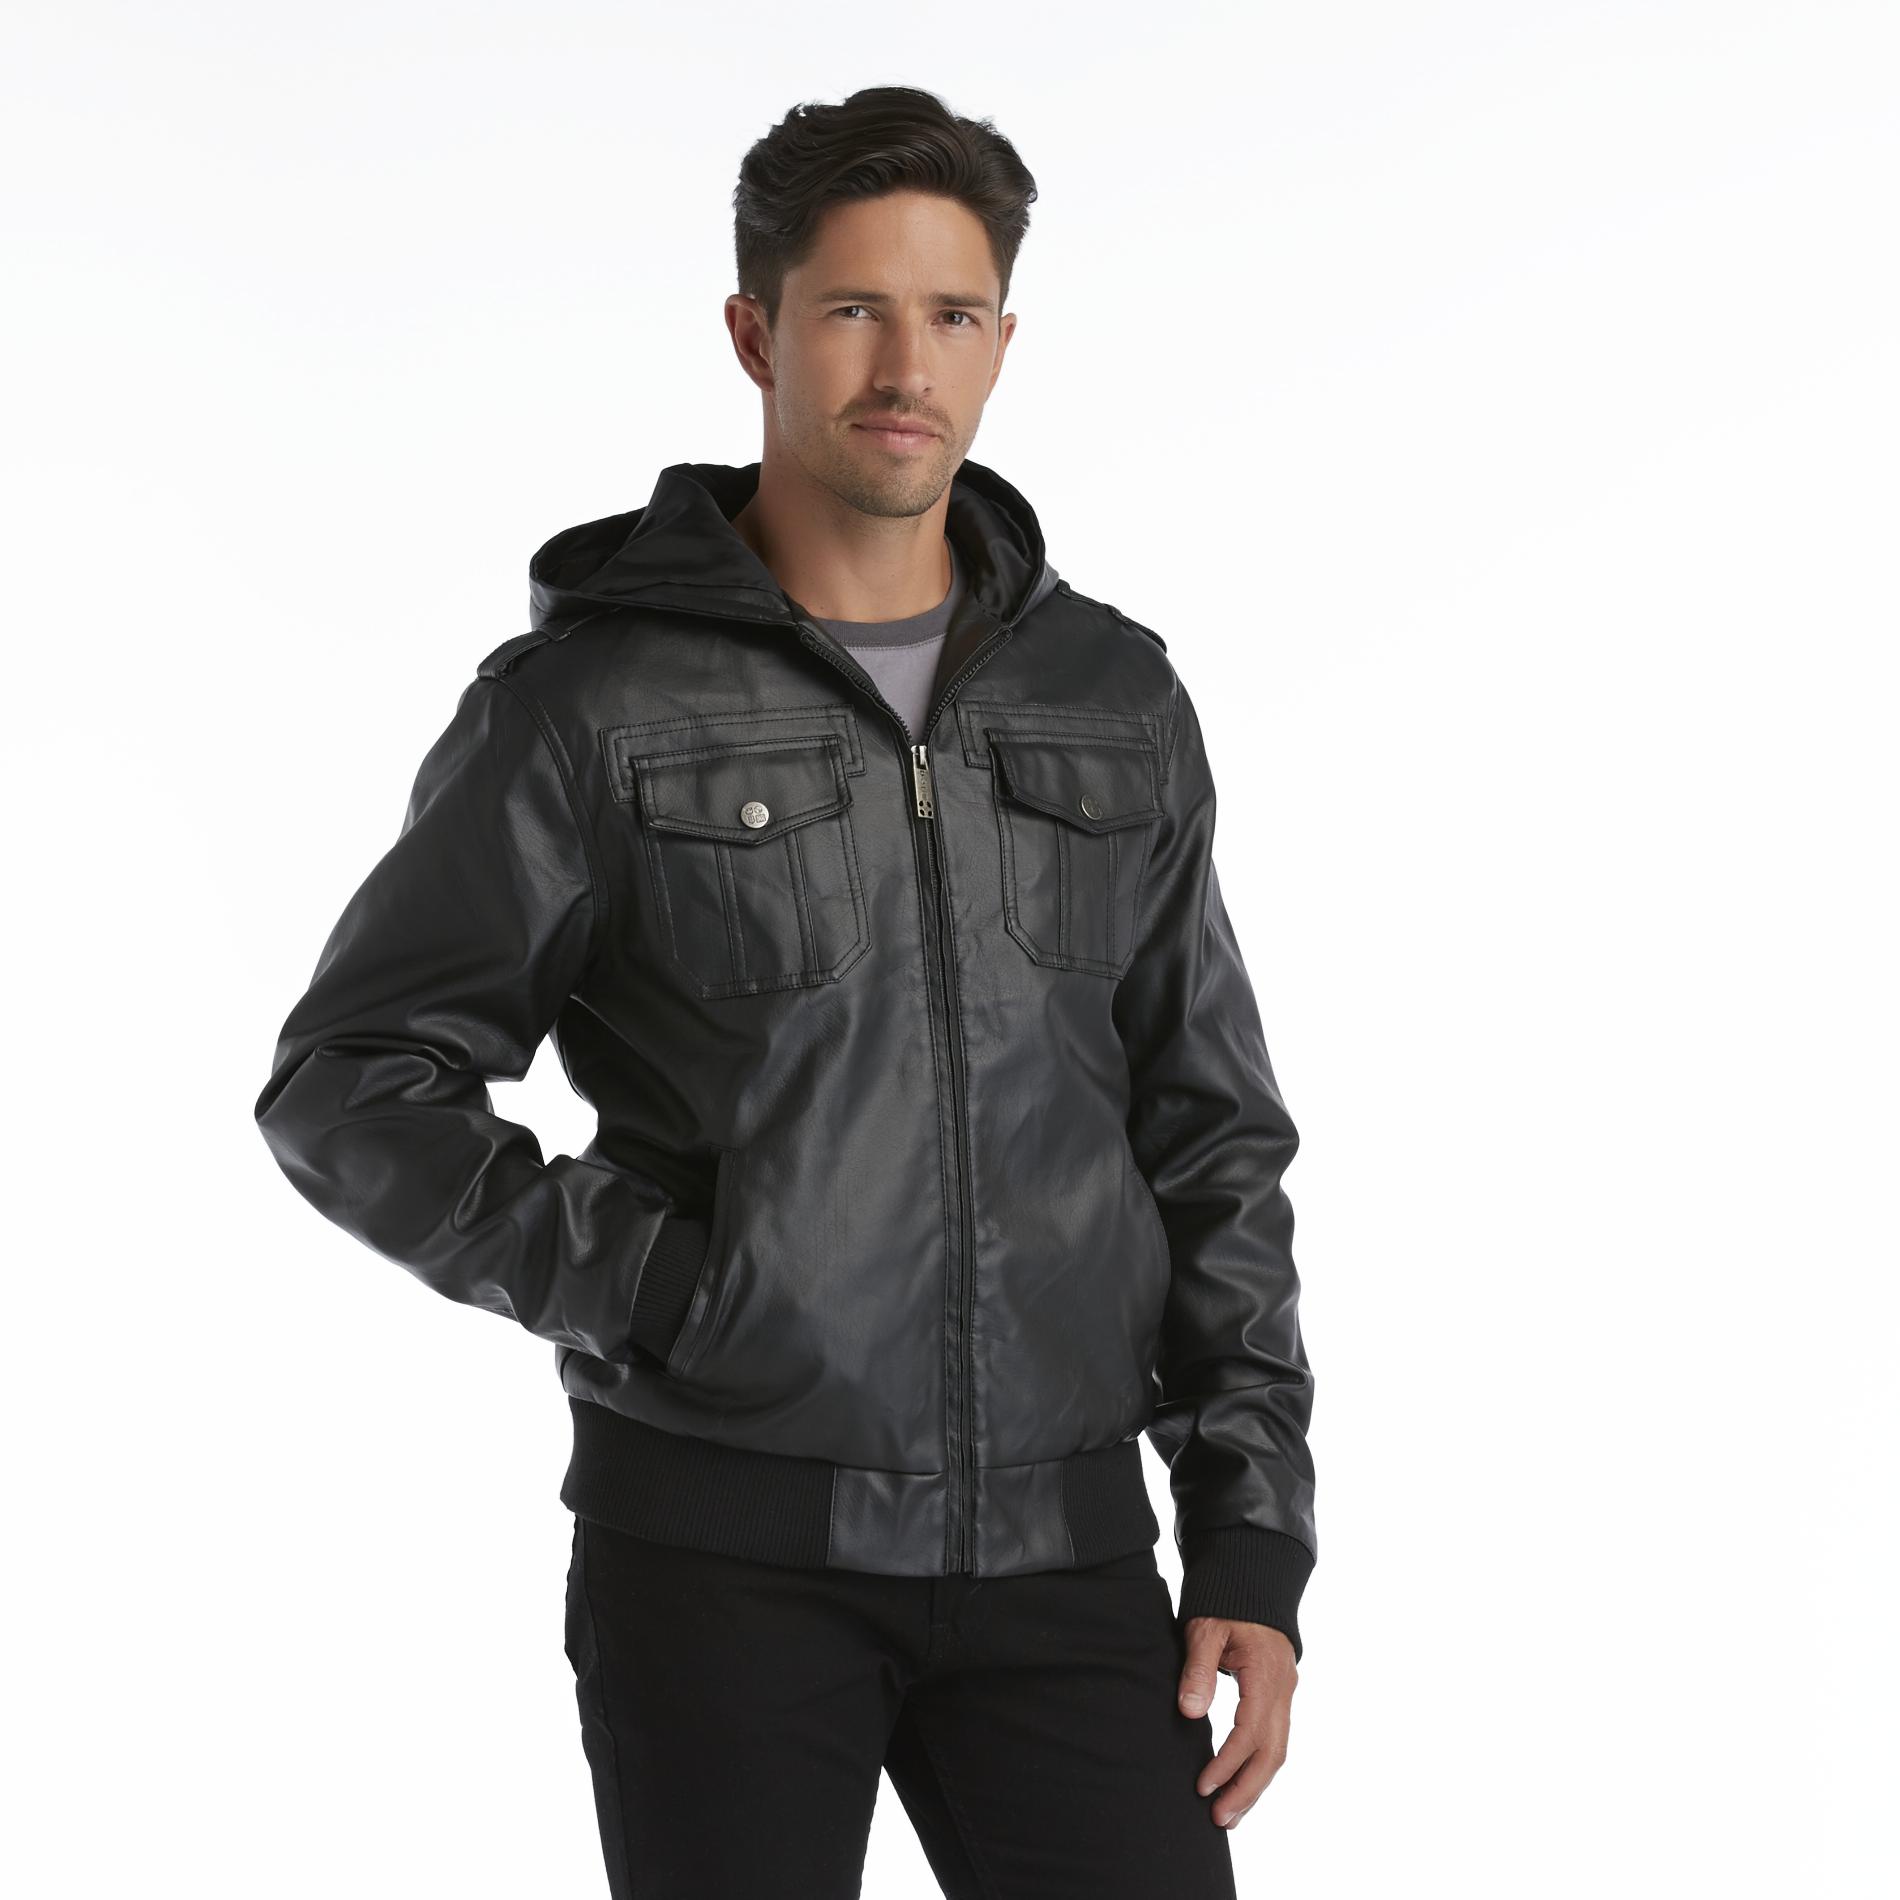 Whispering Smith Men's Hooded Motorcycle Jacket Shop